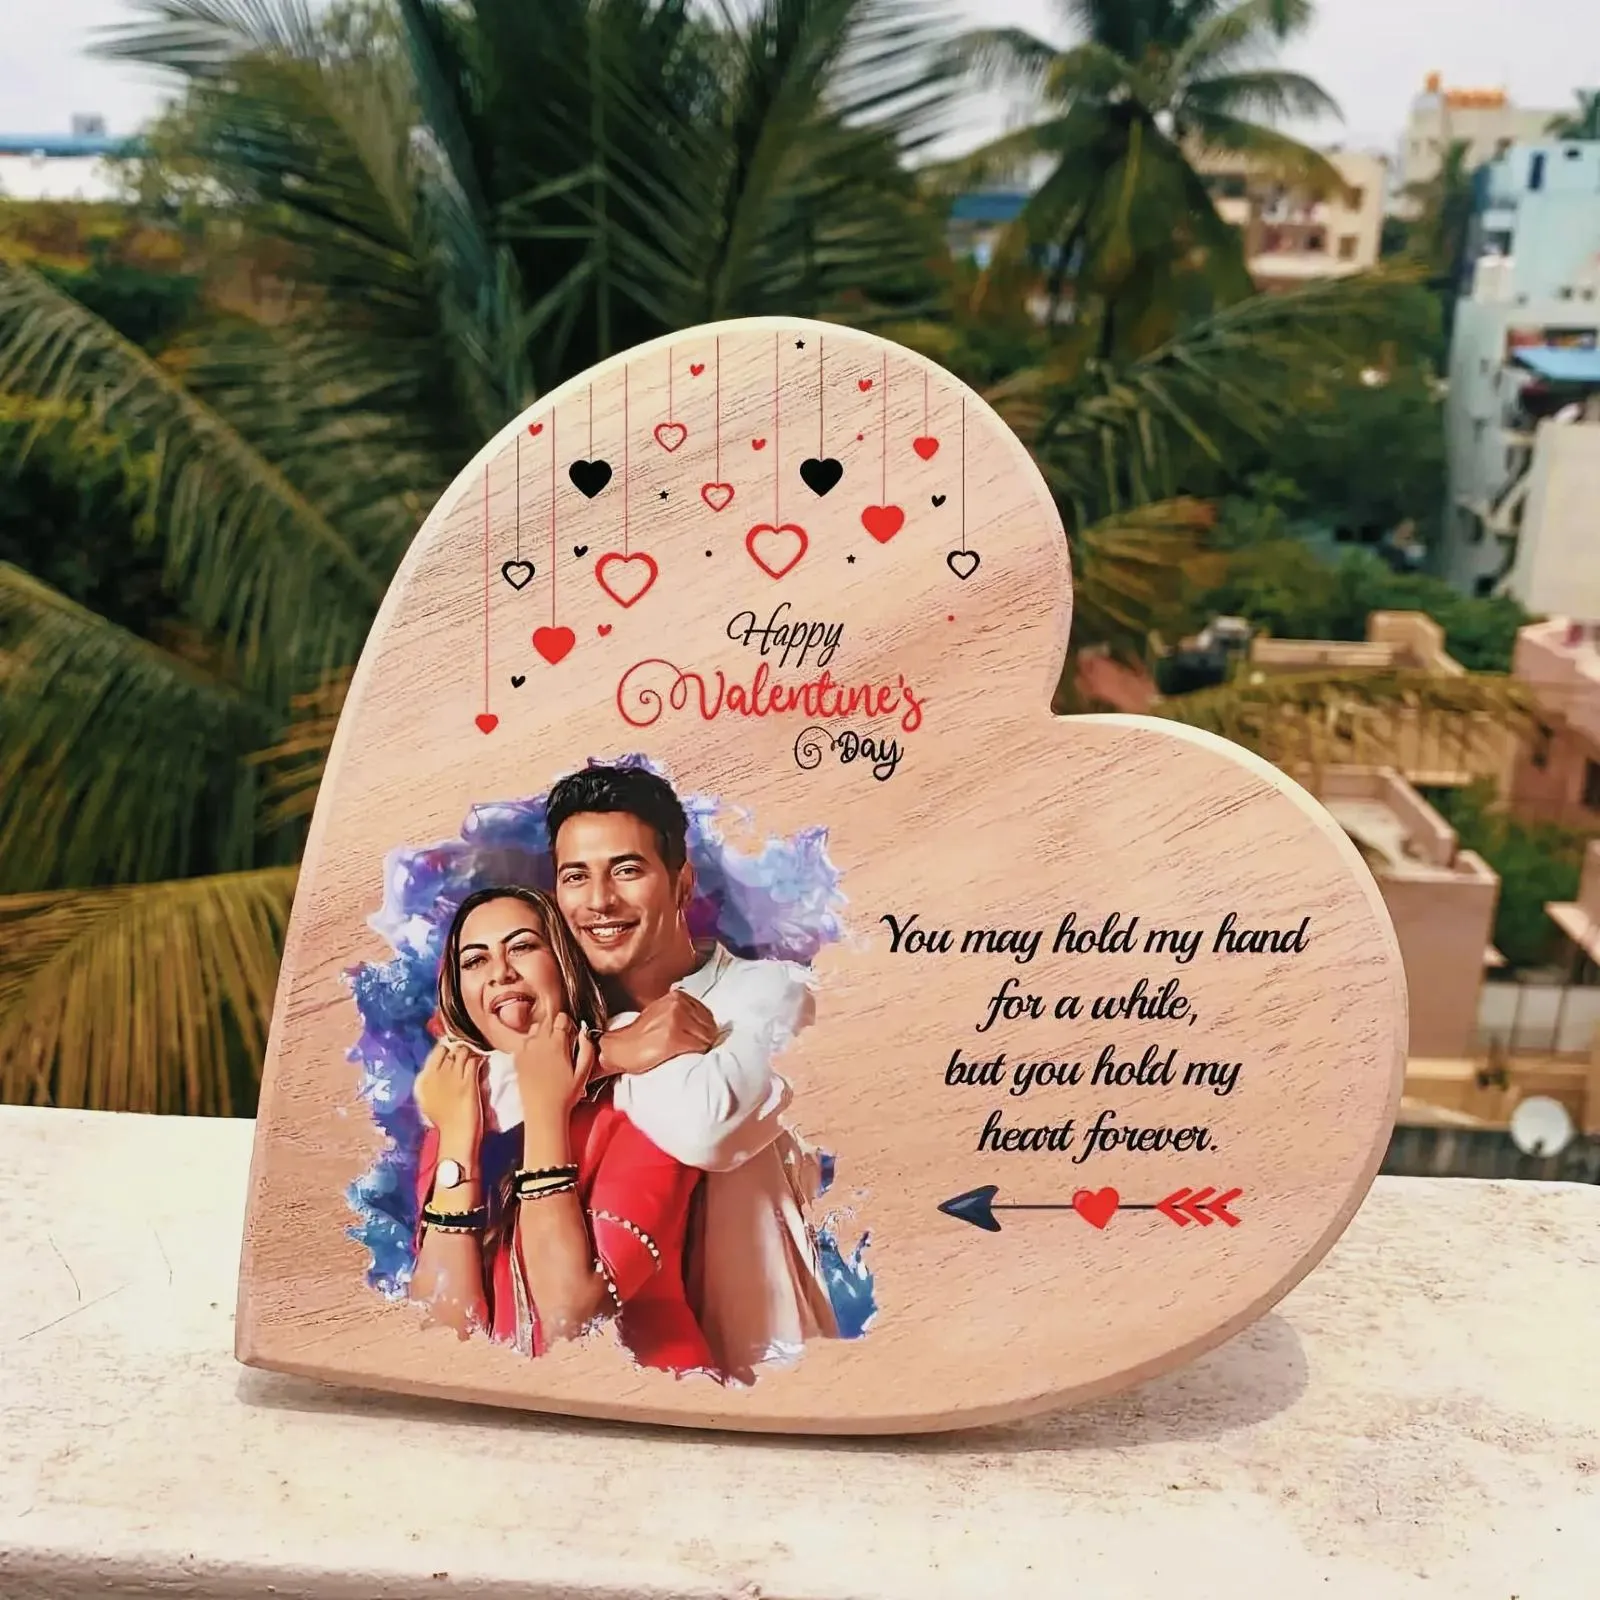 Wooden heart-shaped frame with a photograph of a man and woman